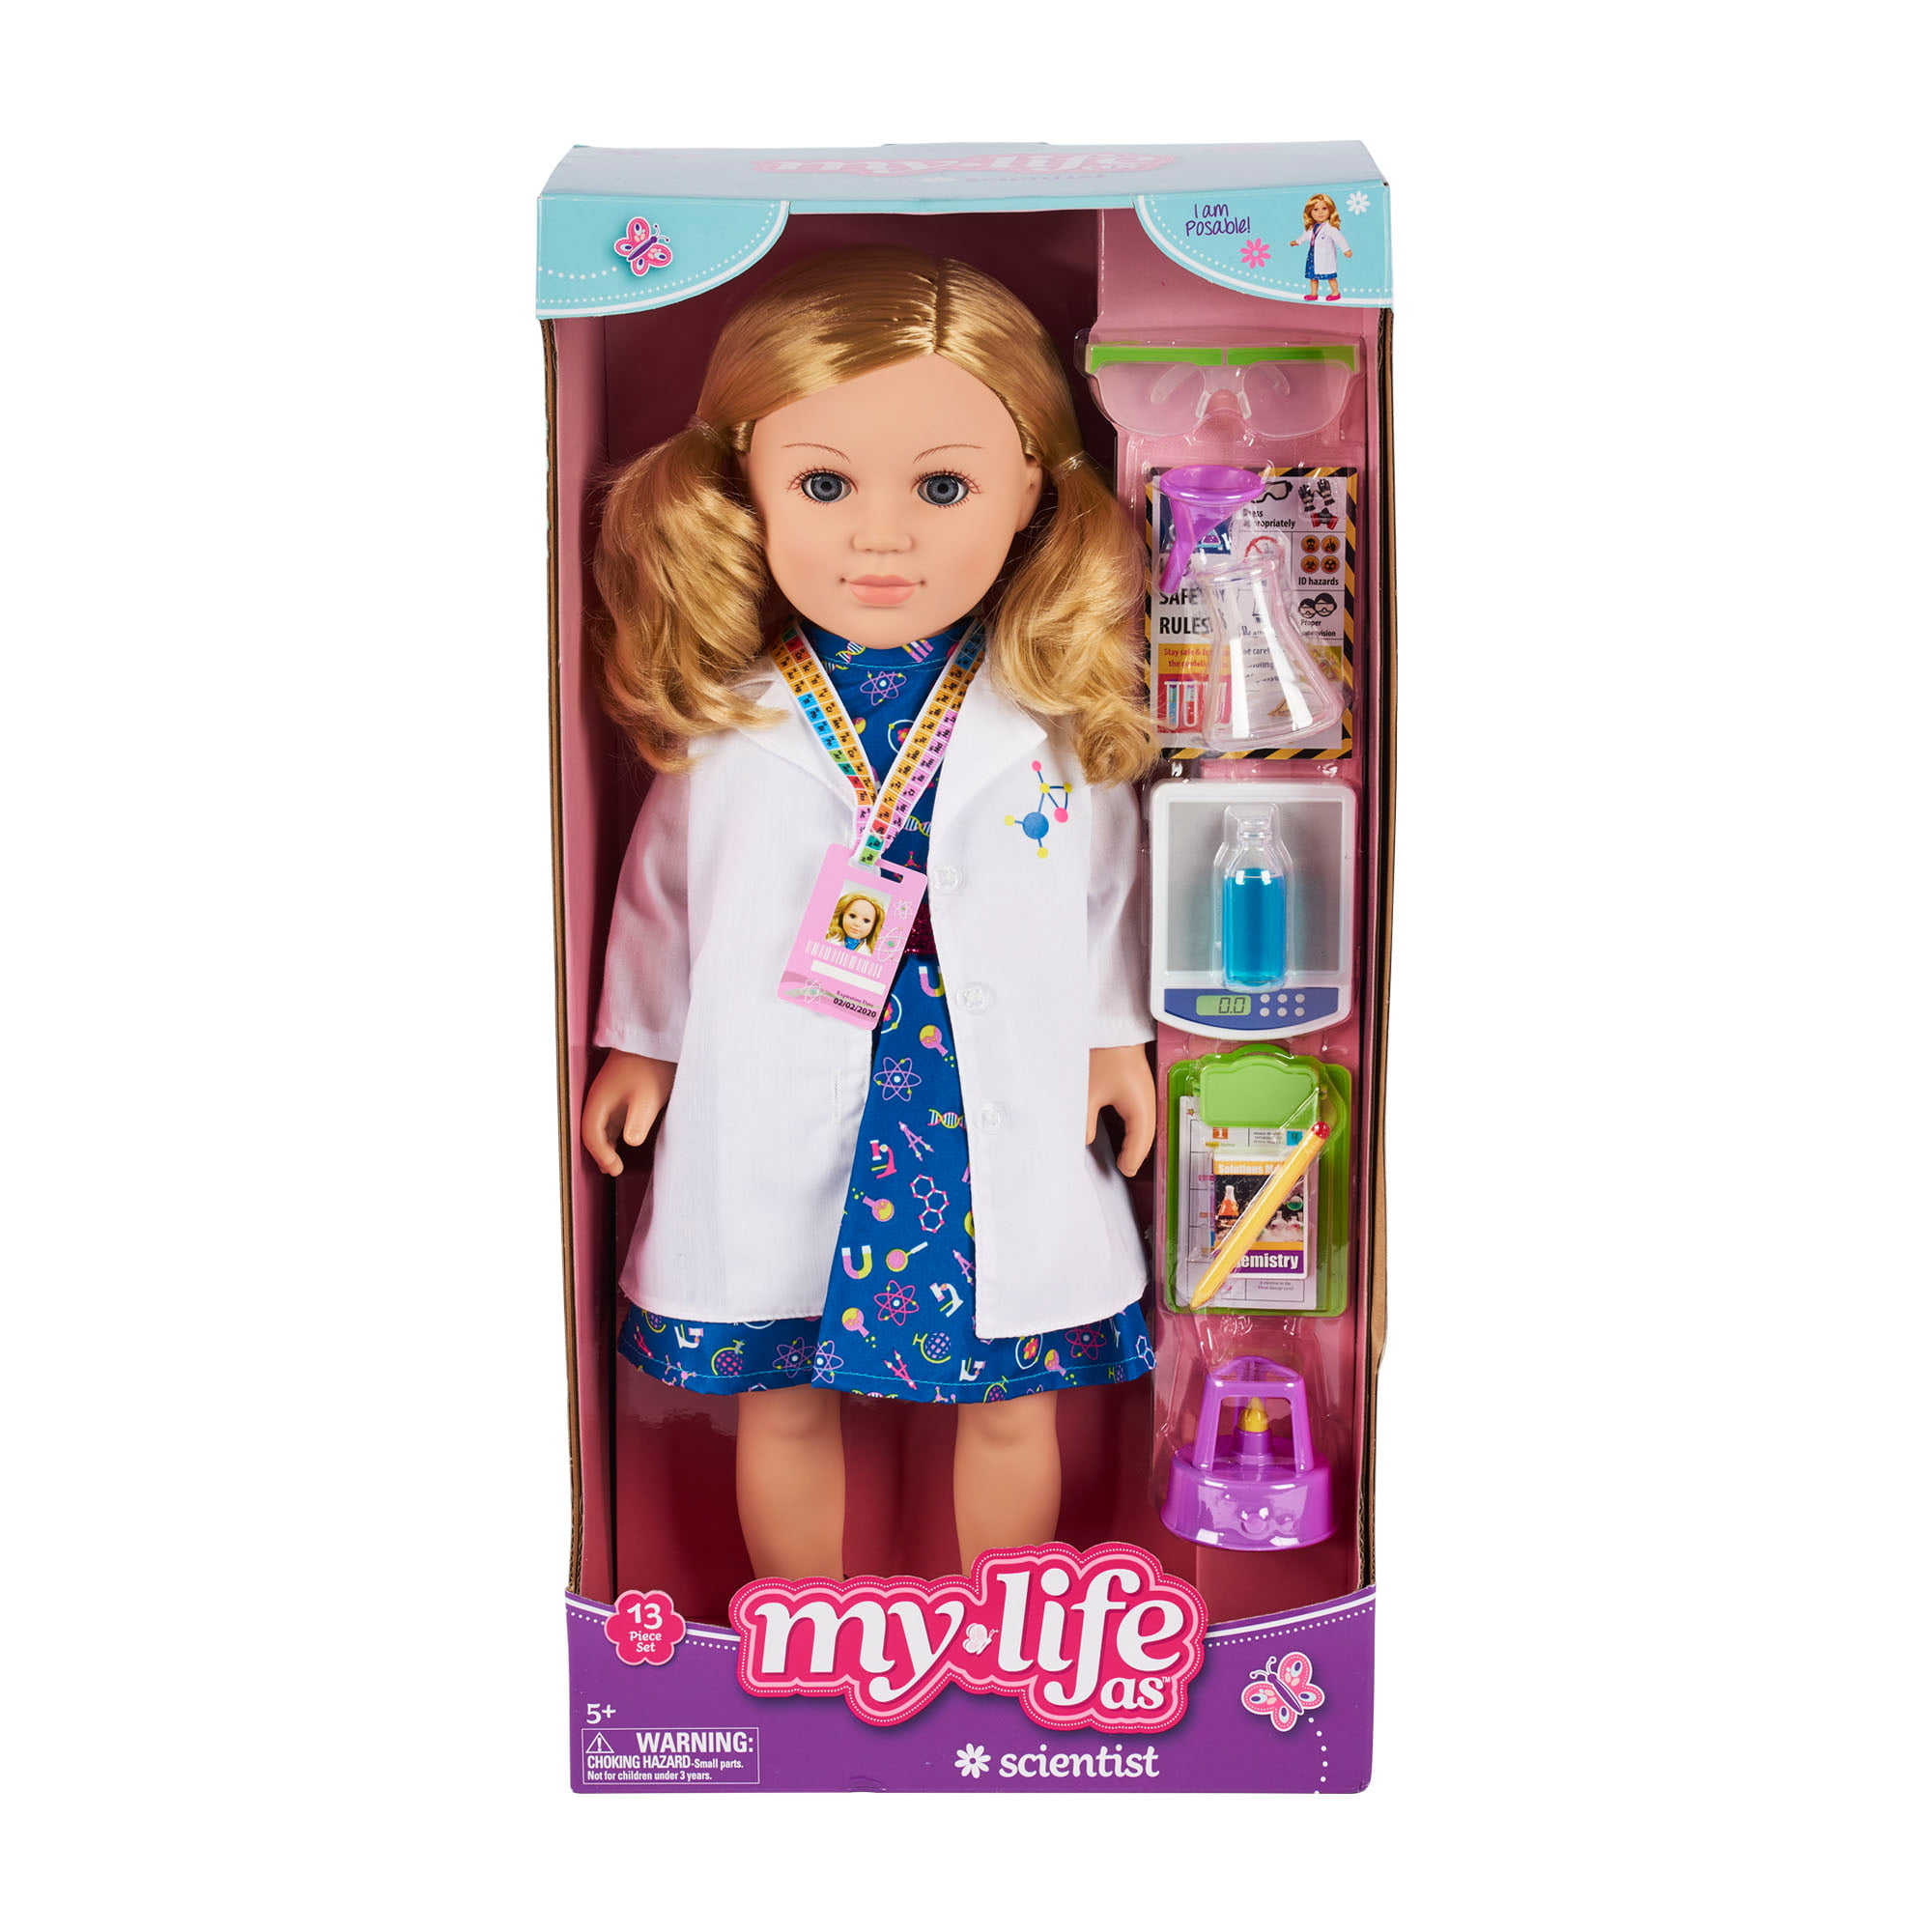 My Life As Scientist 18" Doll Blonde 13 piece set  NEW 5+ 